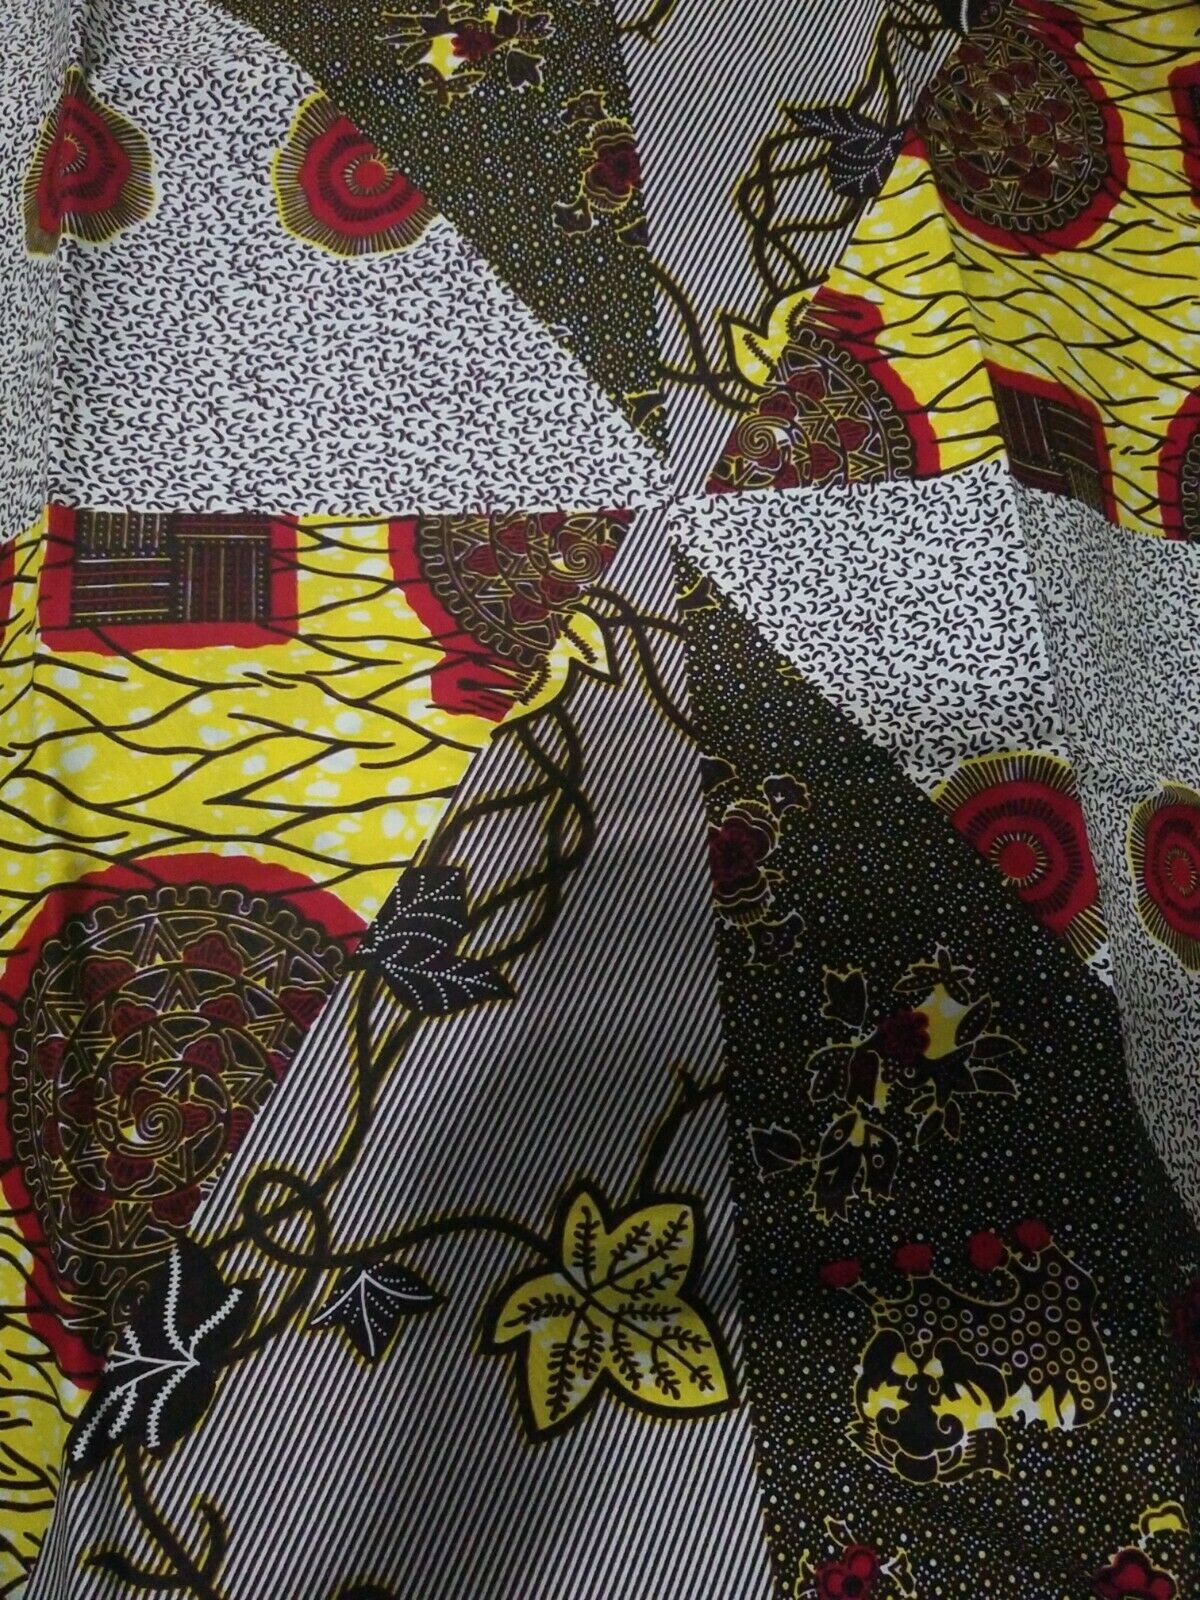 Assorted motif vibrant Yellow African Print fabric ~2 yds $12